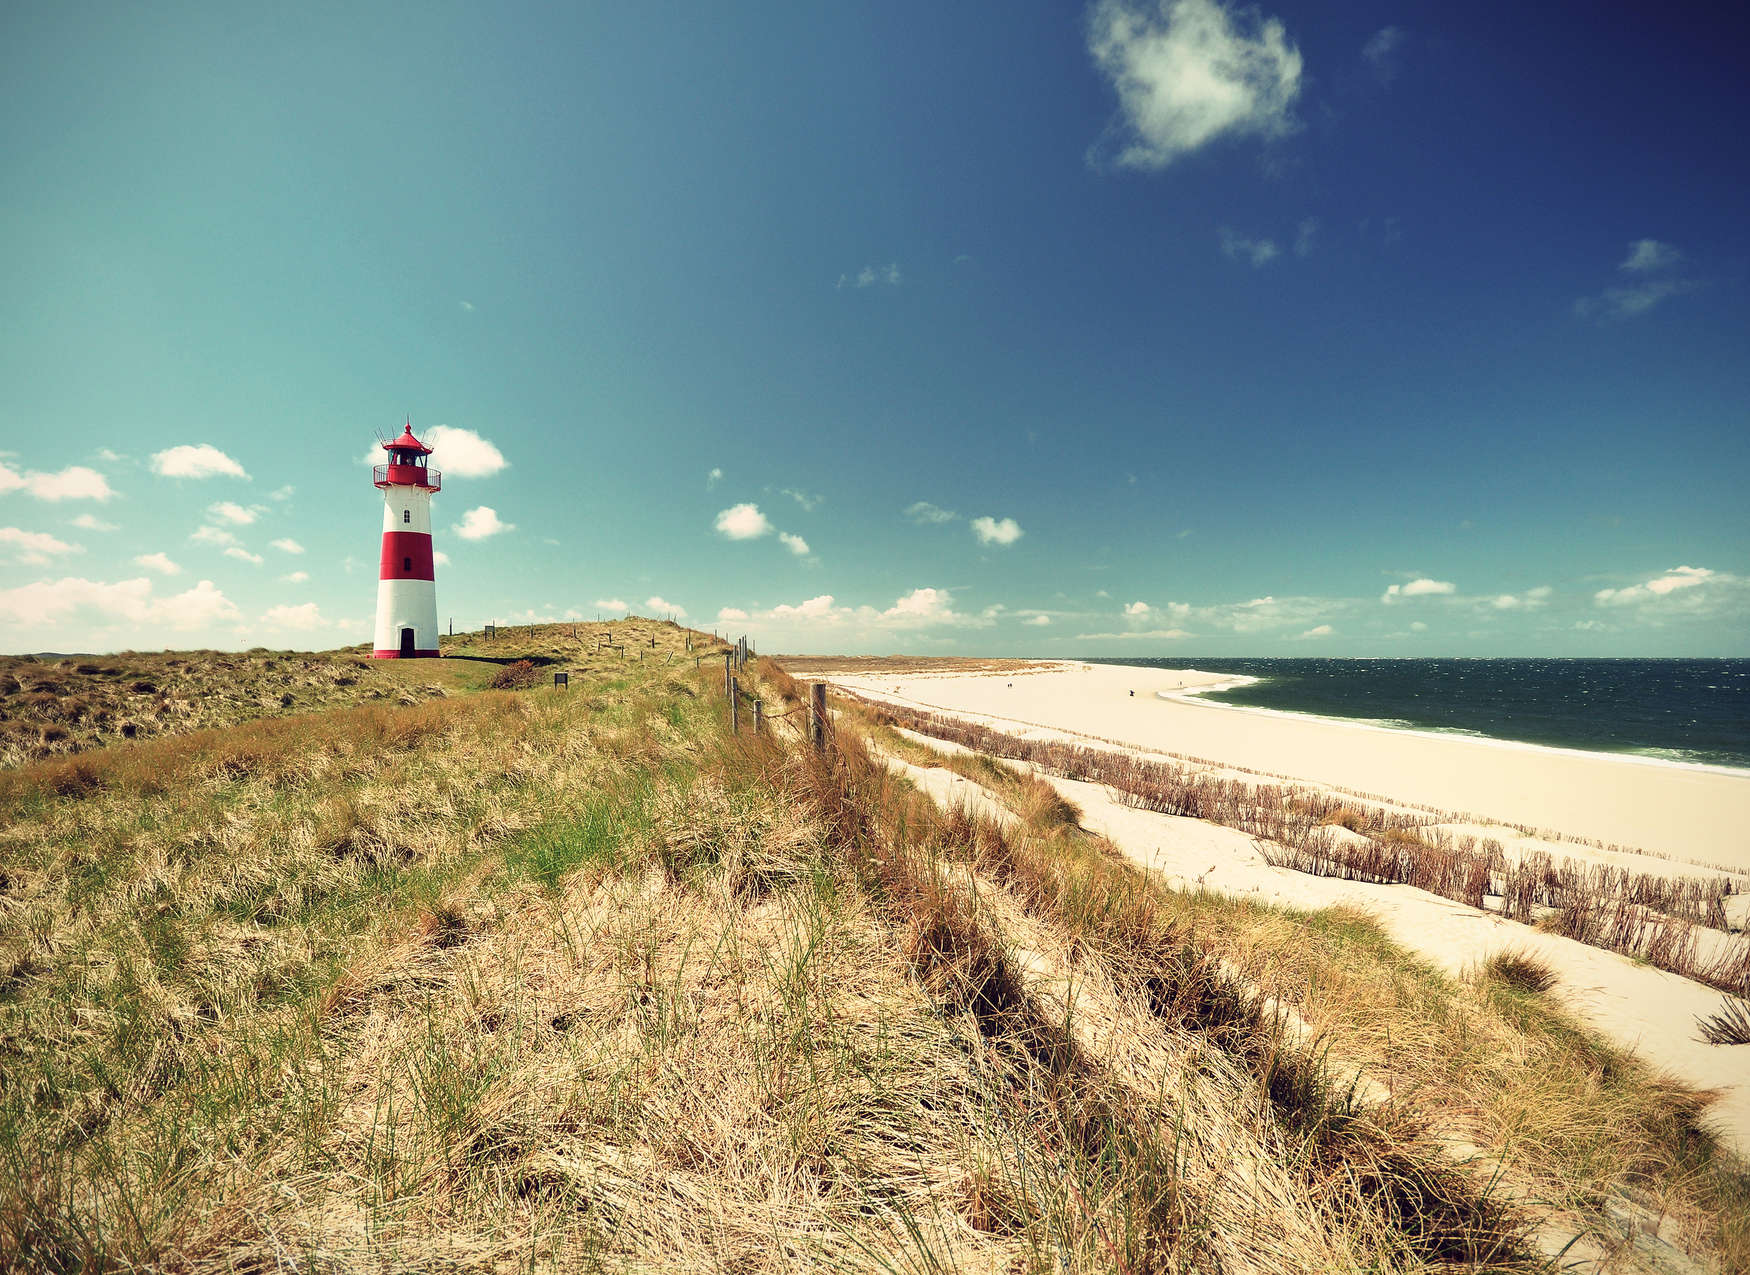             Beach Landscape with Lighthouse - Green, Blue, Brown
        